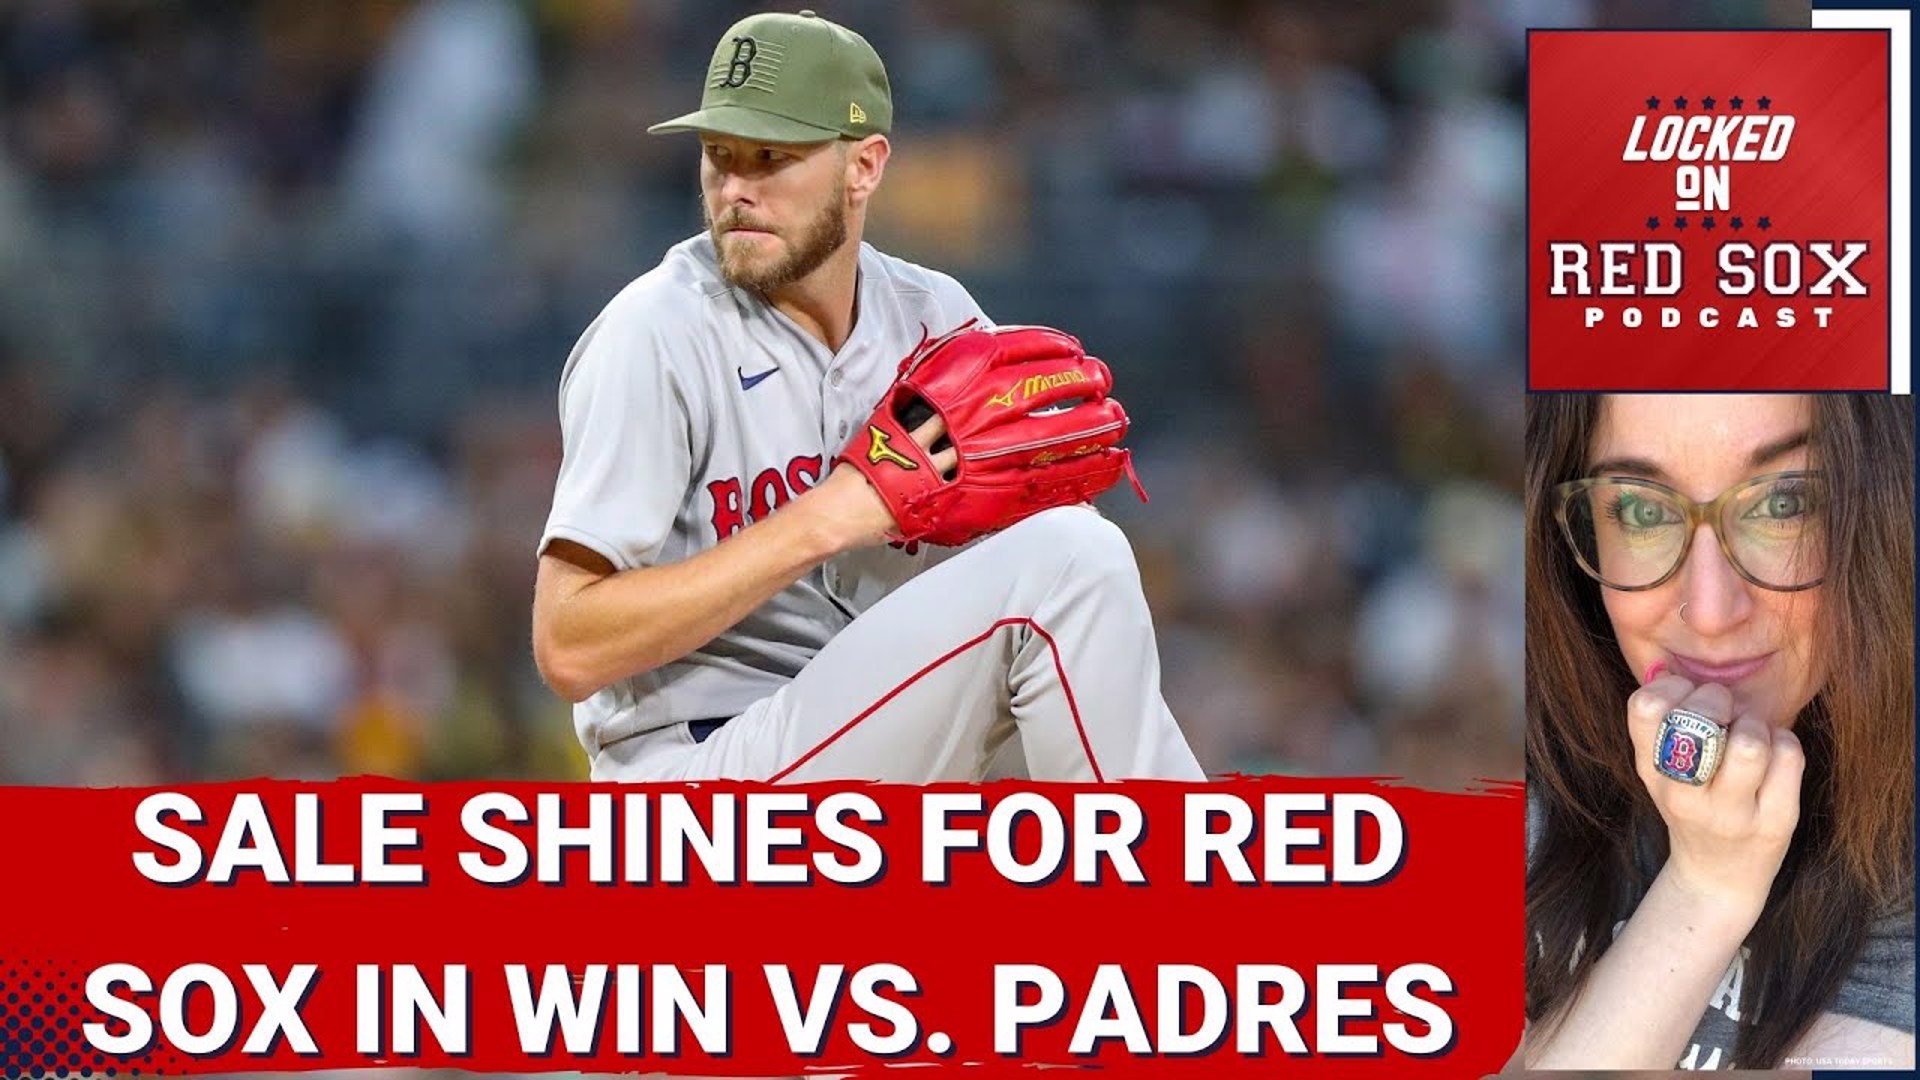 The Boston Red Sox officially won the series against the San Diego Padres with a 4-2 win at Petco Park on Saturday night.